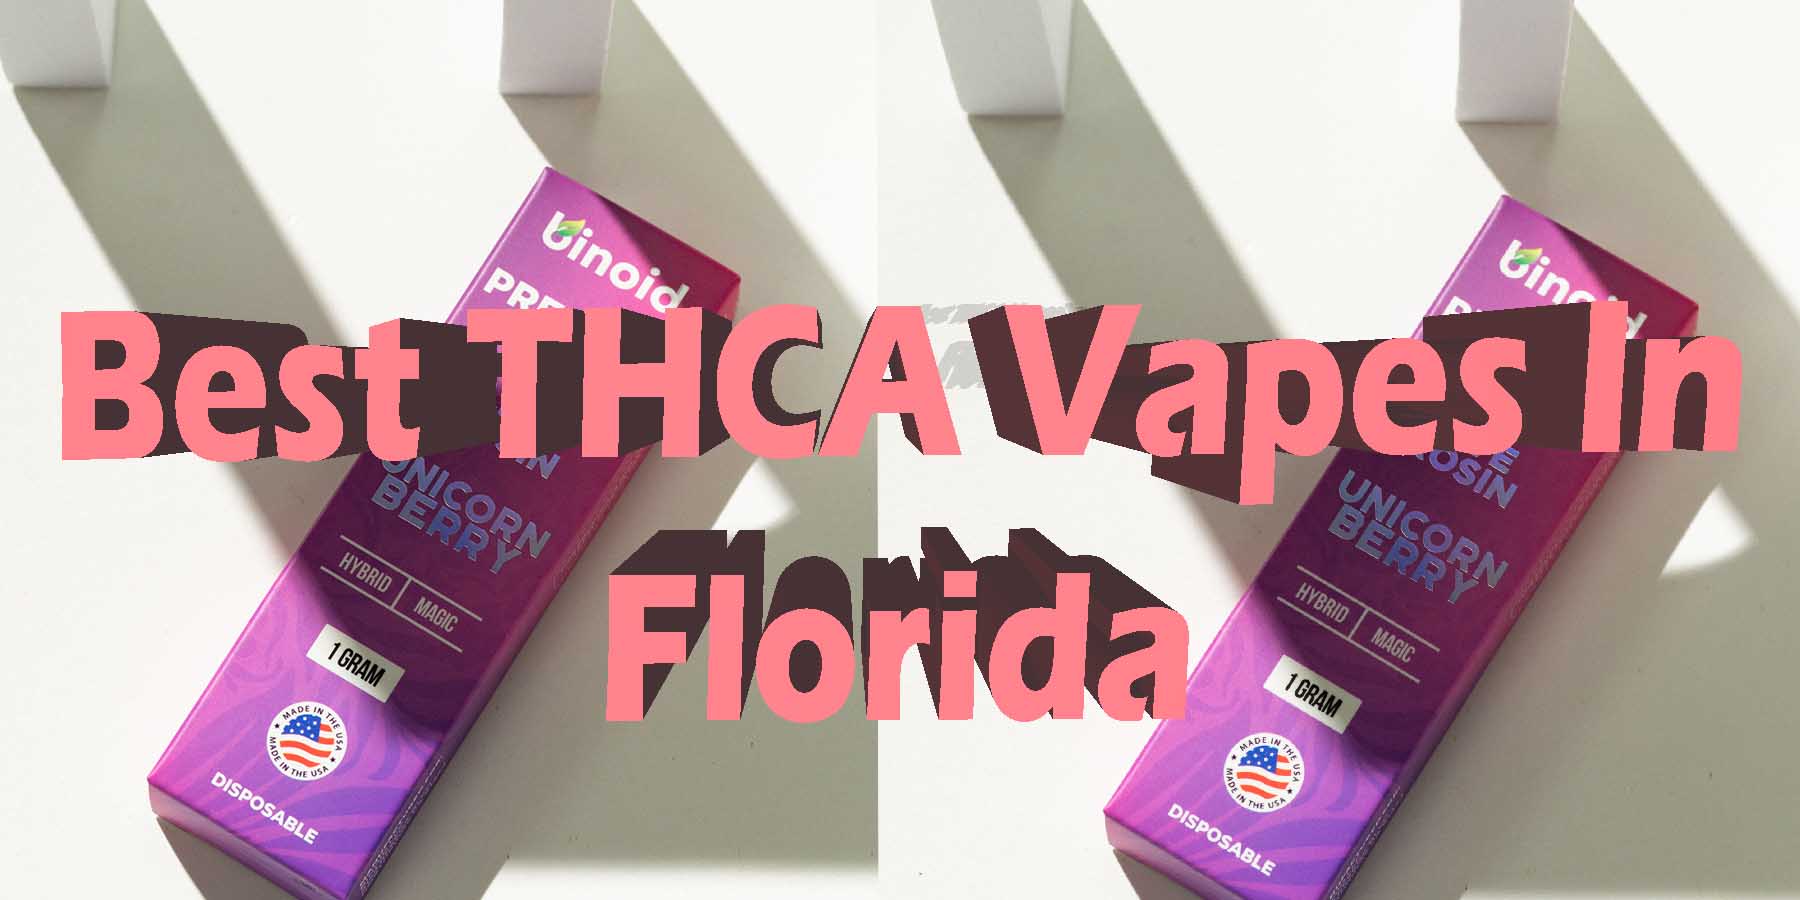 THCA In Florida Best THCA Vapes Florida WhereToGet HowToBuy BestPrice GetNearMe Lowest Coupon DiscountStore ShopOnline Quality Legal Binoid For Sale Review ShopBinoid